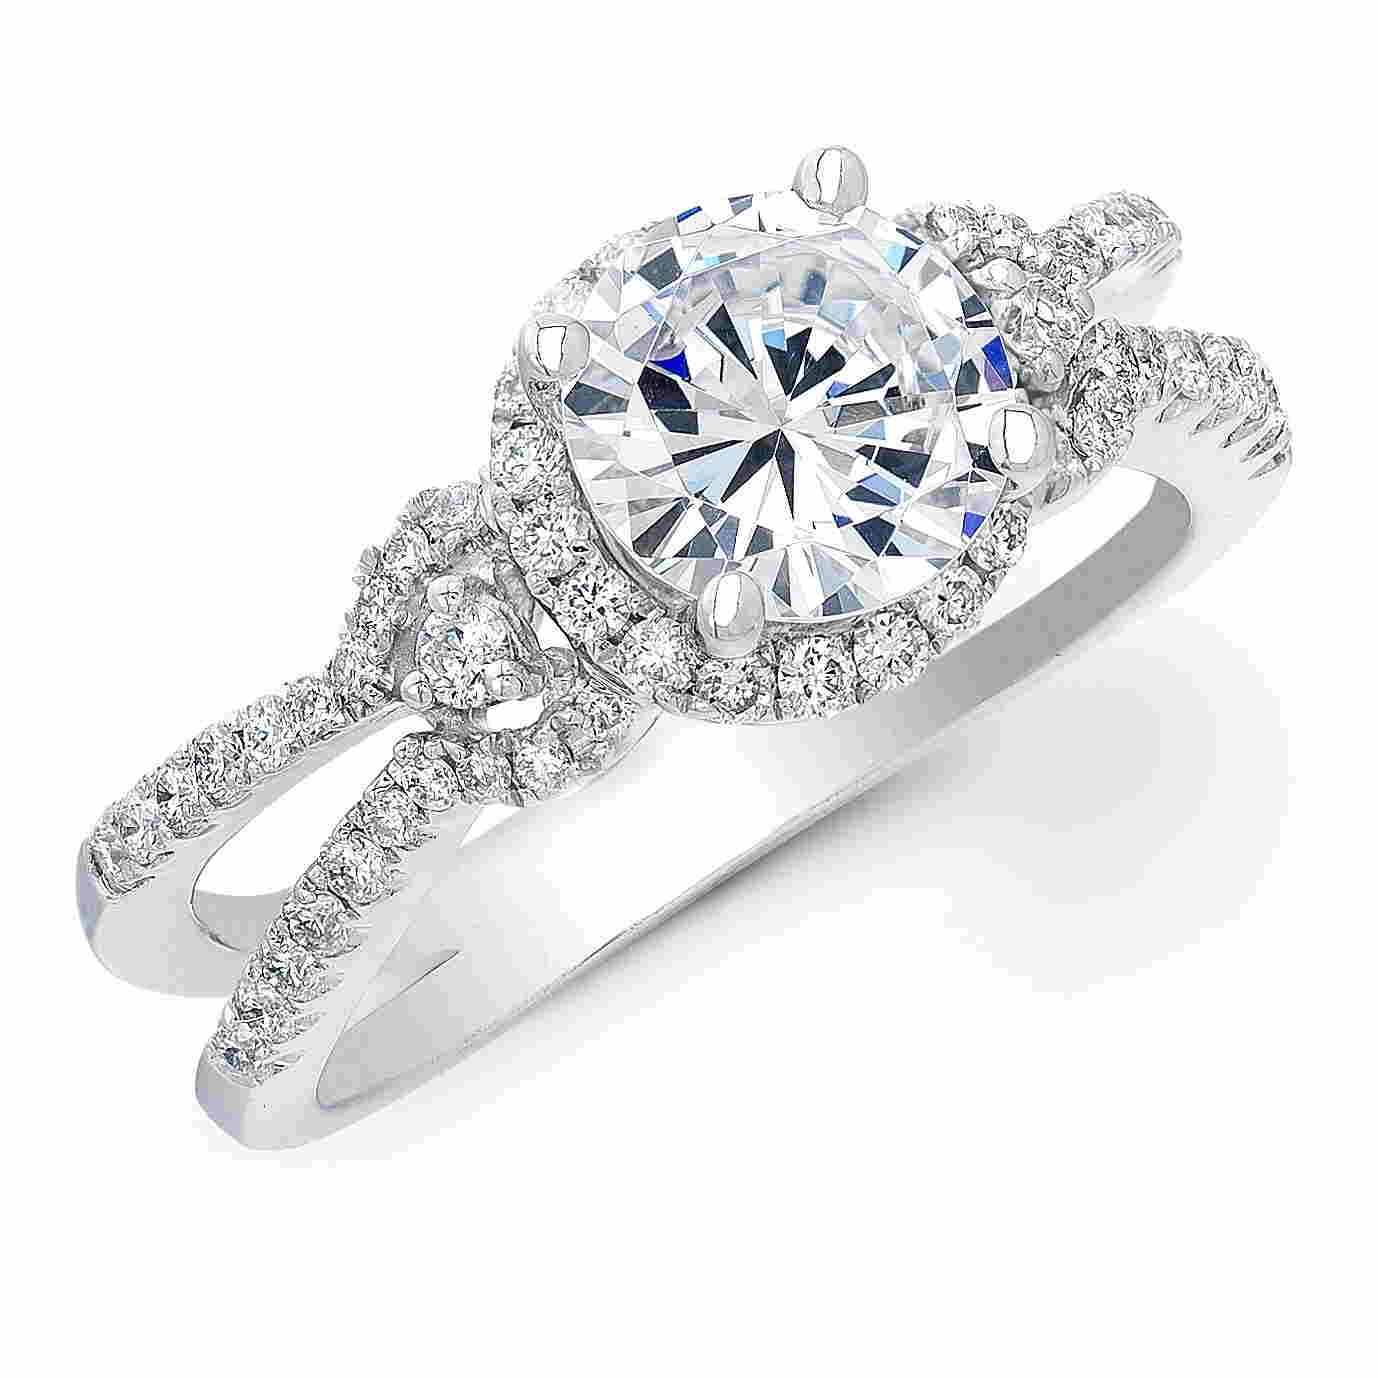 Engagement ring — Jewelers in Bloomfield Hills, MI